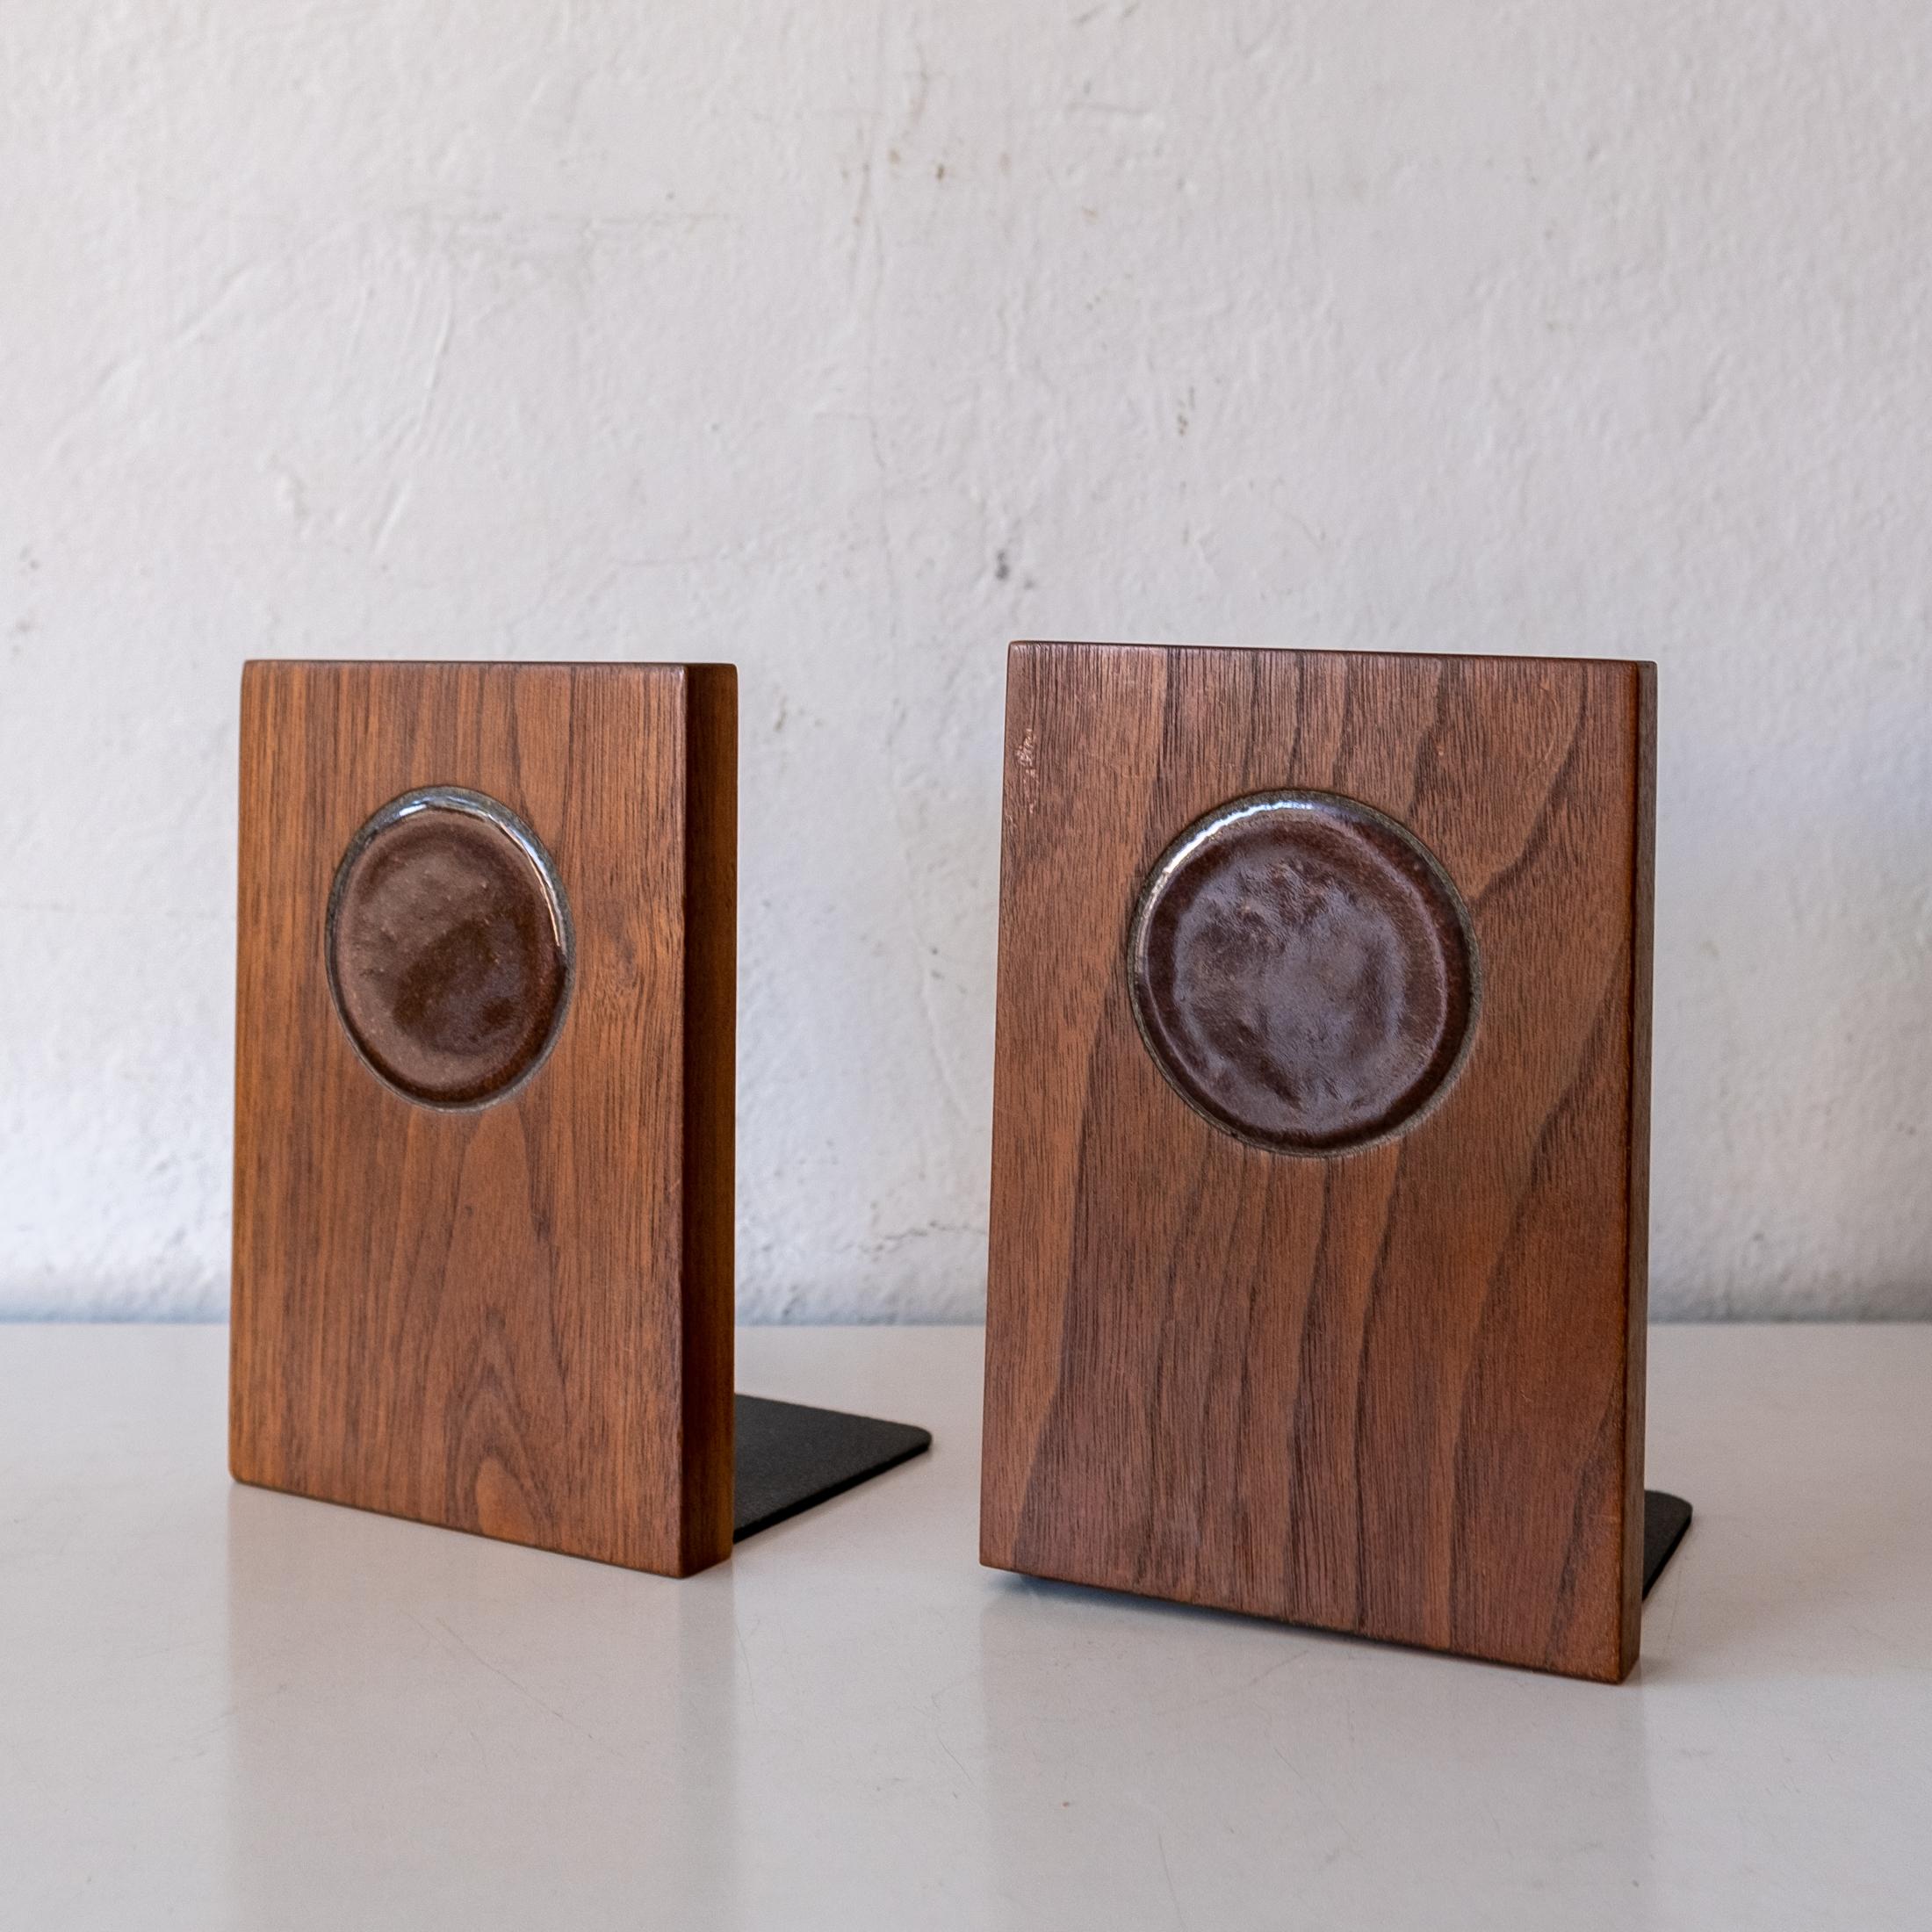 20th Century Midcentury Walnut and Ceramic Tile and Bookends For Sale